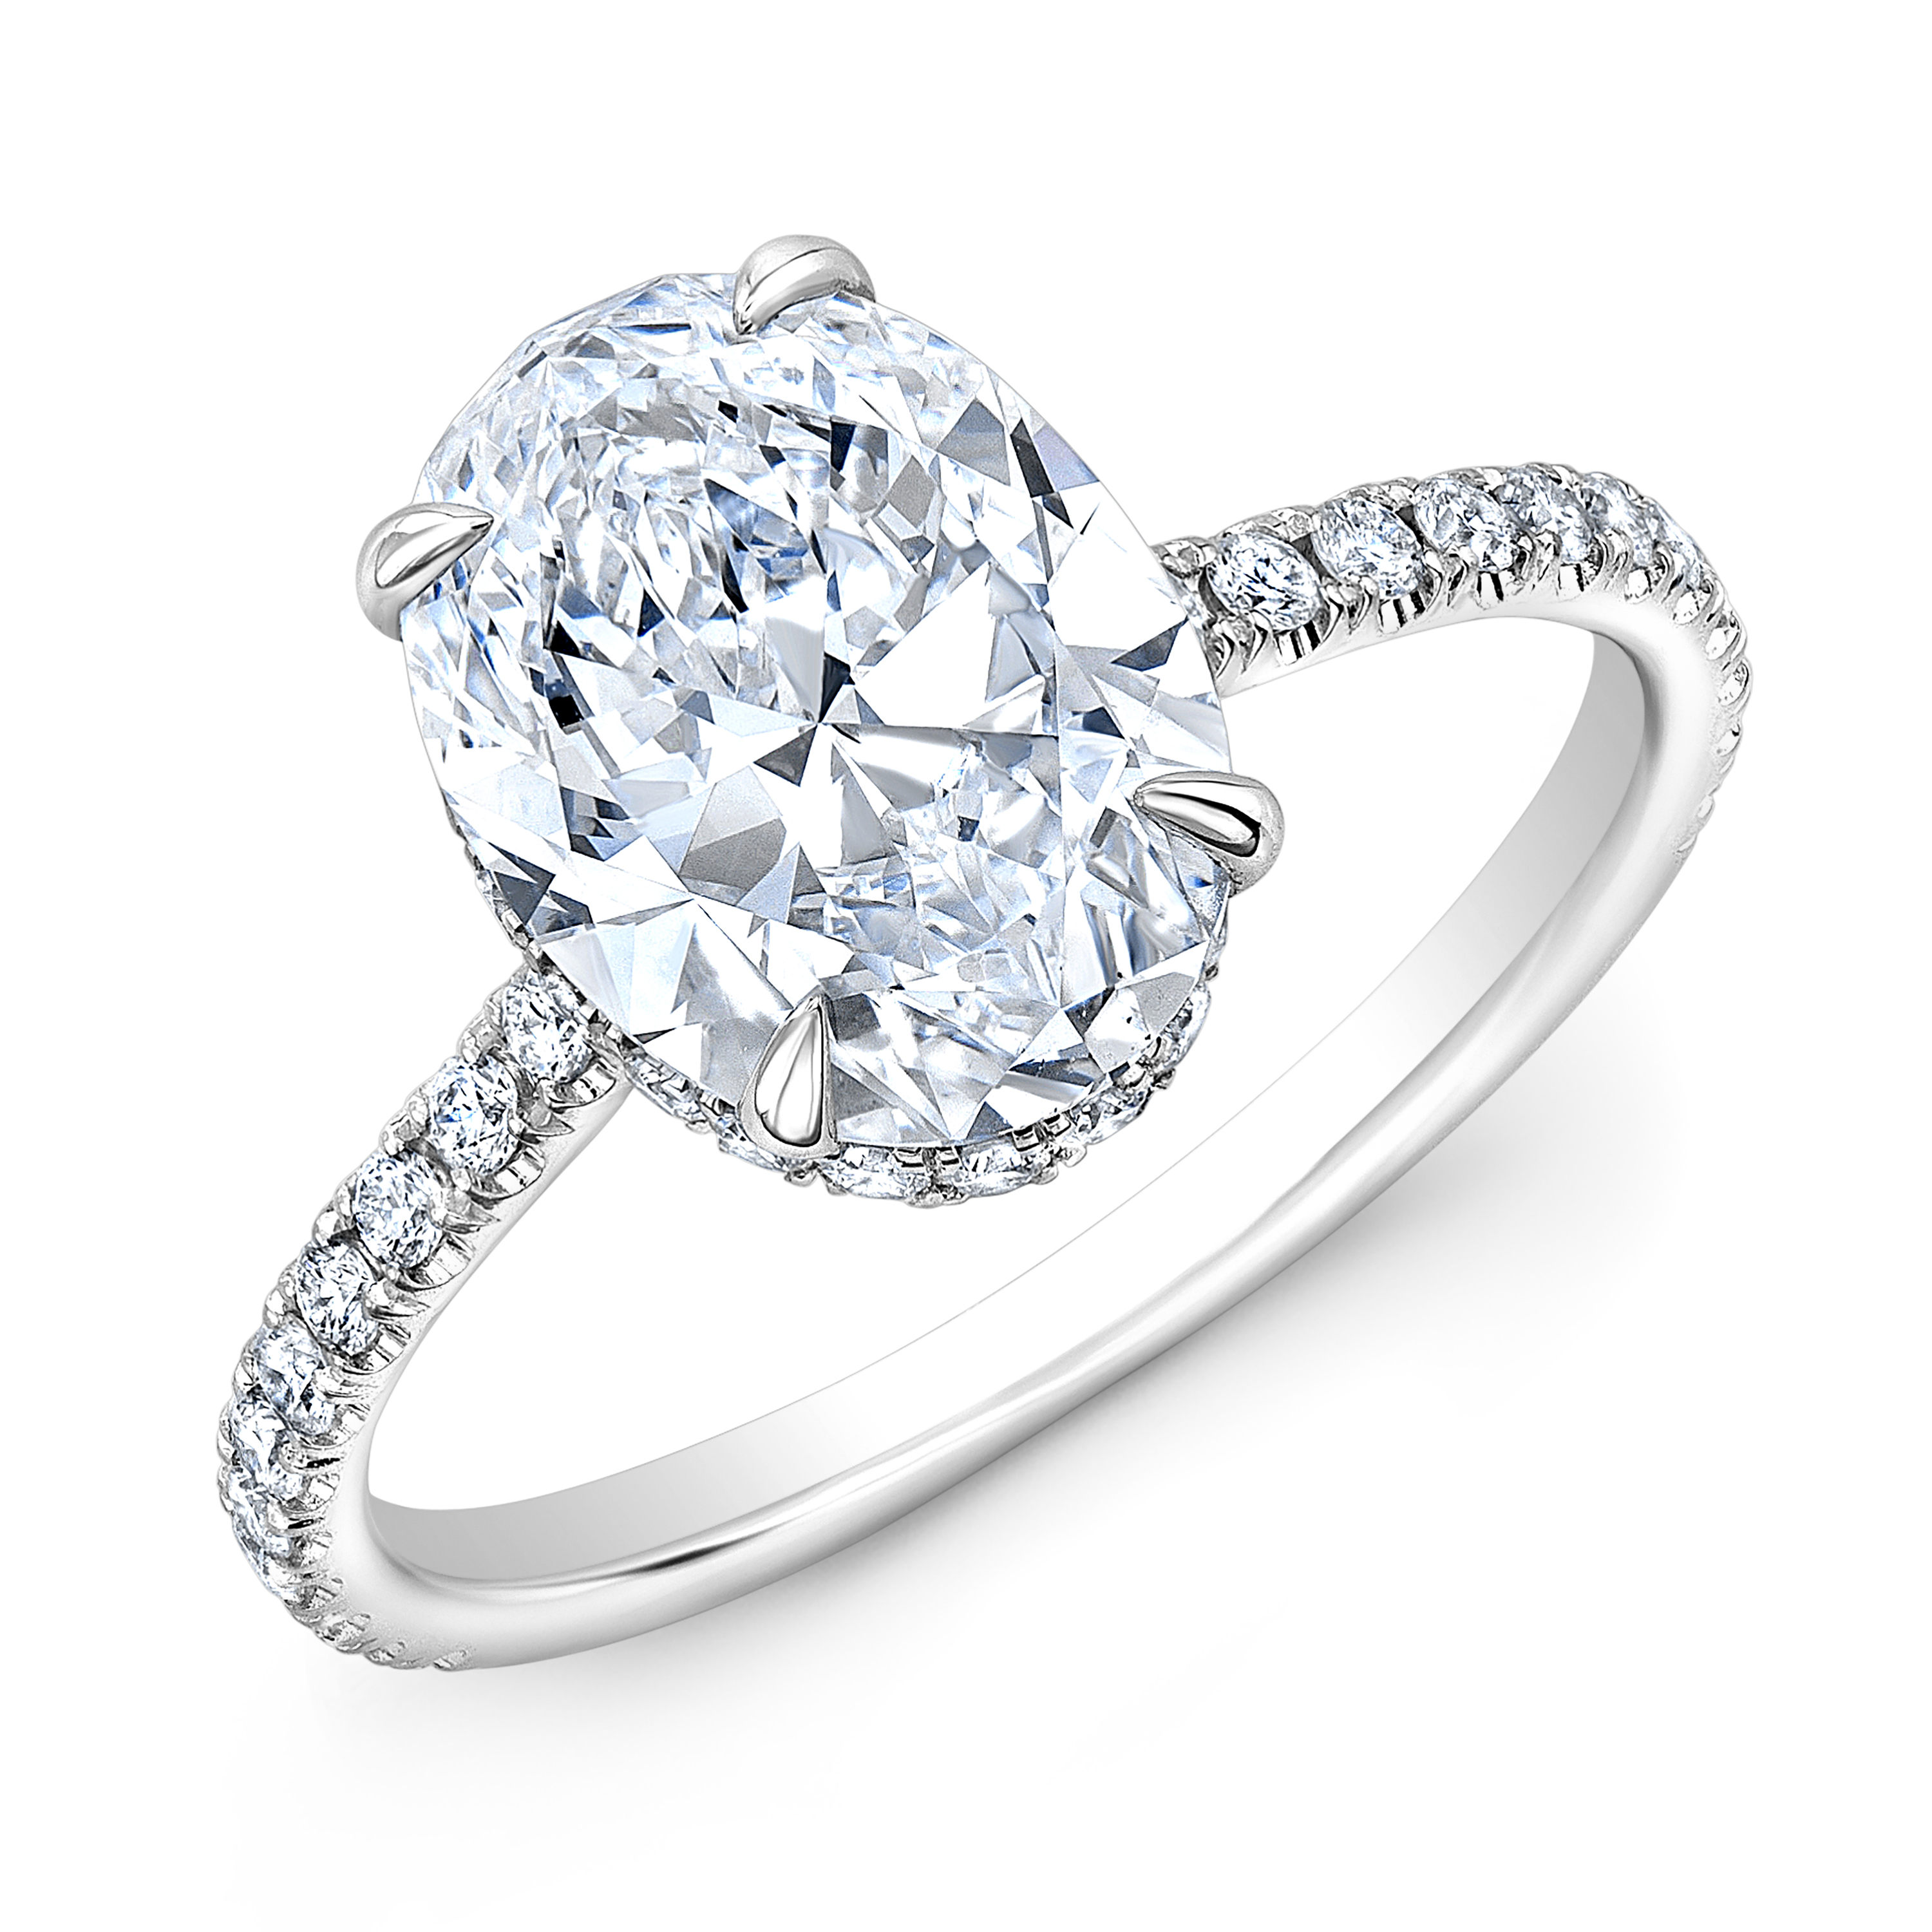 Halo oval Engagement Ring | Engagement Rings | Nir Oliva Jewelry